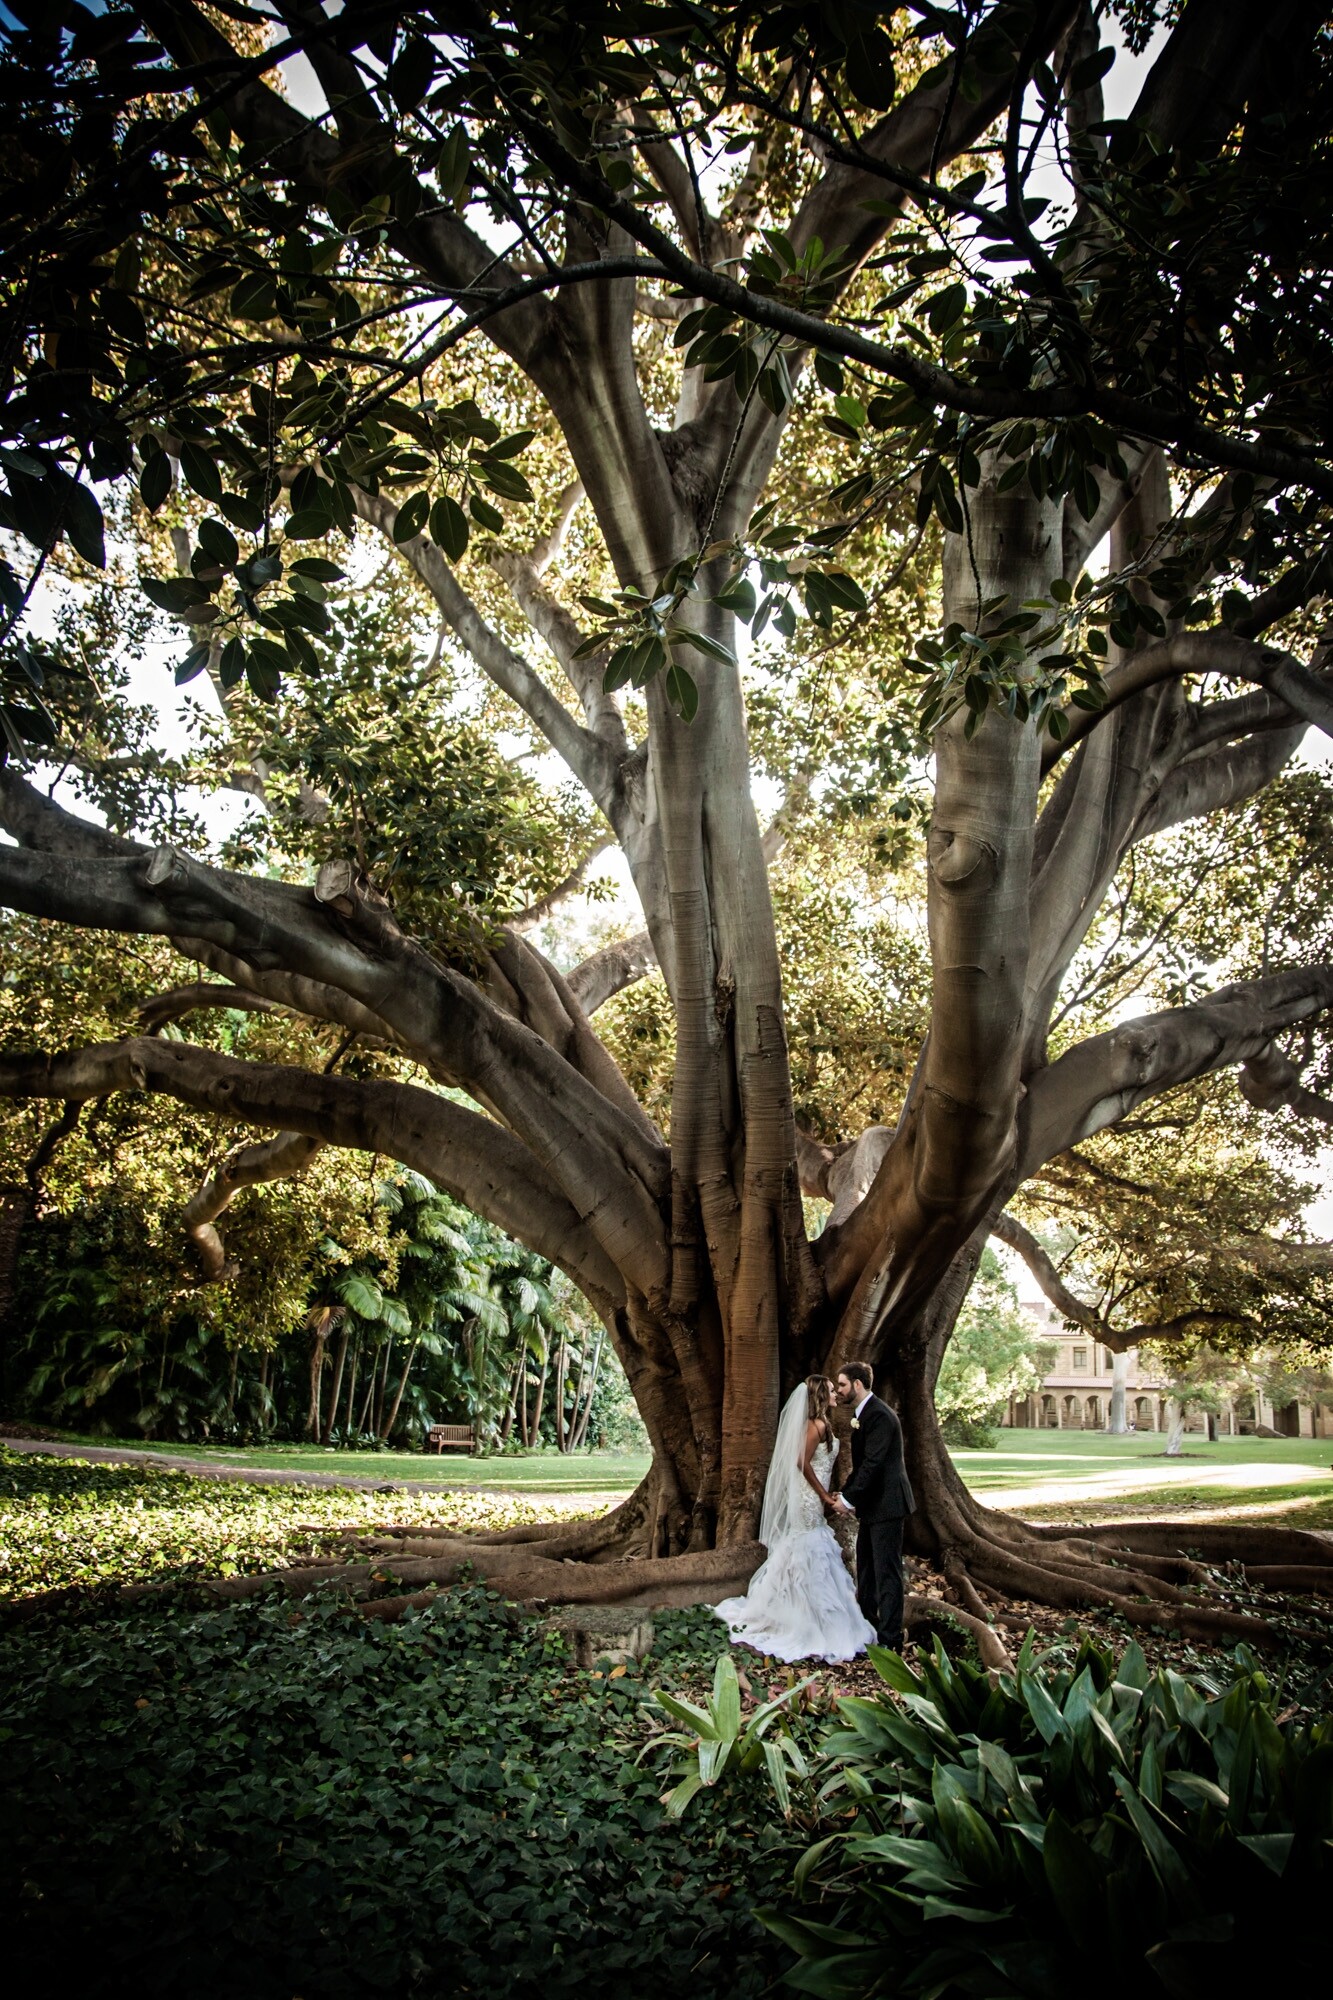 We photographed this gorgeous couple’s wedding in March 2016. One of the venues they chose for their photo session in between the ceremony and reception was the University of WA. This is a popular choice for bridal party photography in Perth. It consists of beautiful old architecture as well as stunning gardens. This gorgeous tree is a popular meeting point for people on the grounds. The bride was keen to have some photos that showed lots of garden settings. So the tree was an obvious choice. The light was too harsh on the other side of the tree. But on this side, it filtered beautifully through the branches. so we stood them amongst the roots of the tree, surrounded by a carpet of ivy and captured this image - we love it, so do the couple, it is a feature image in their wedding album.